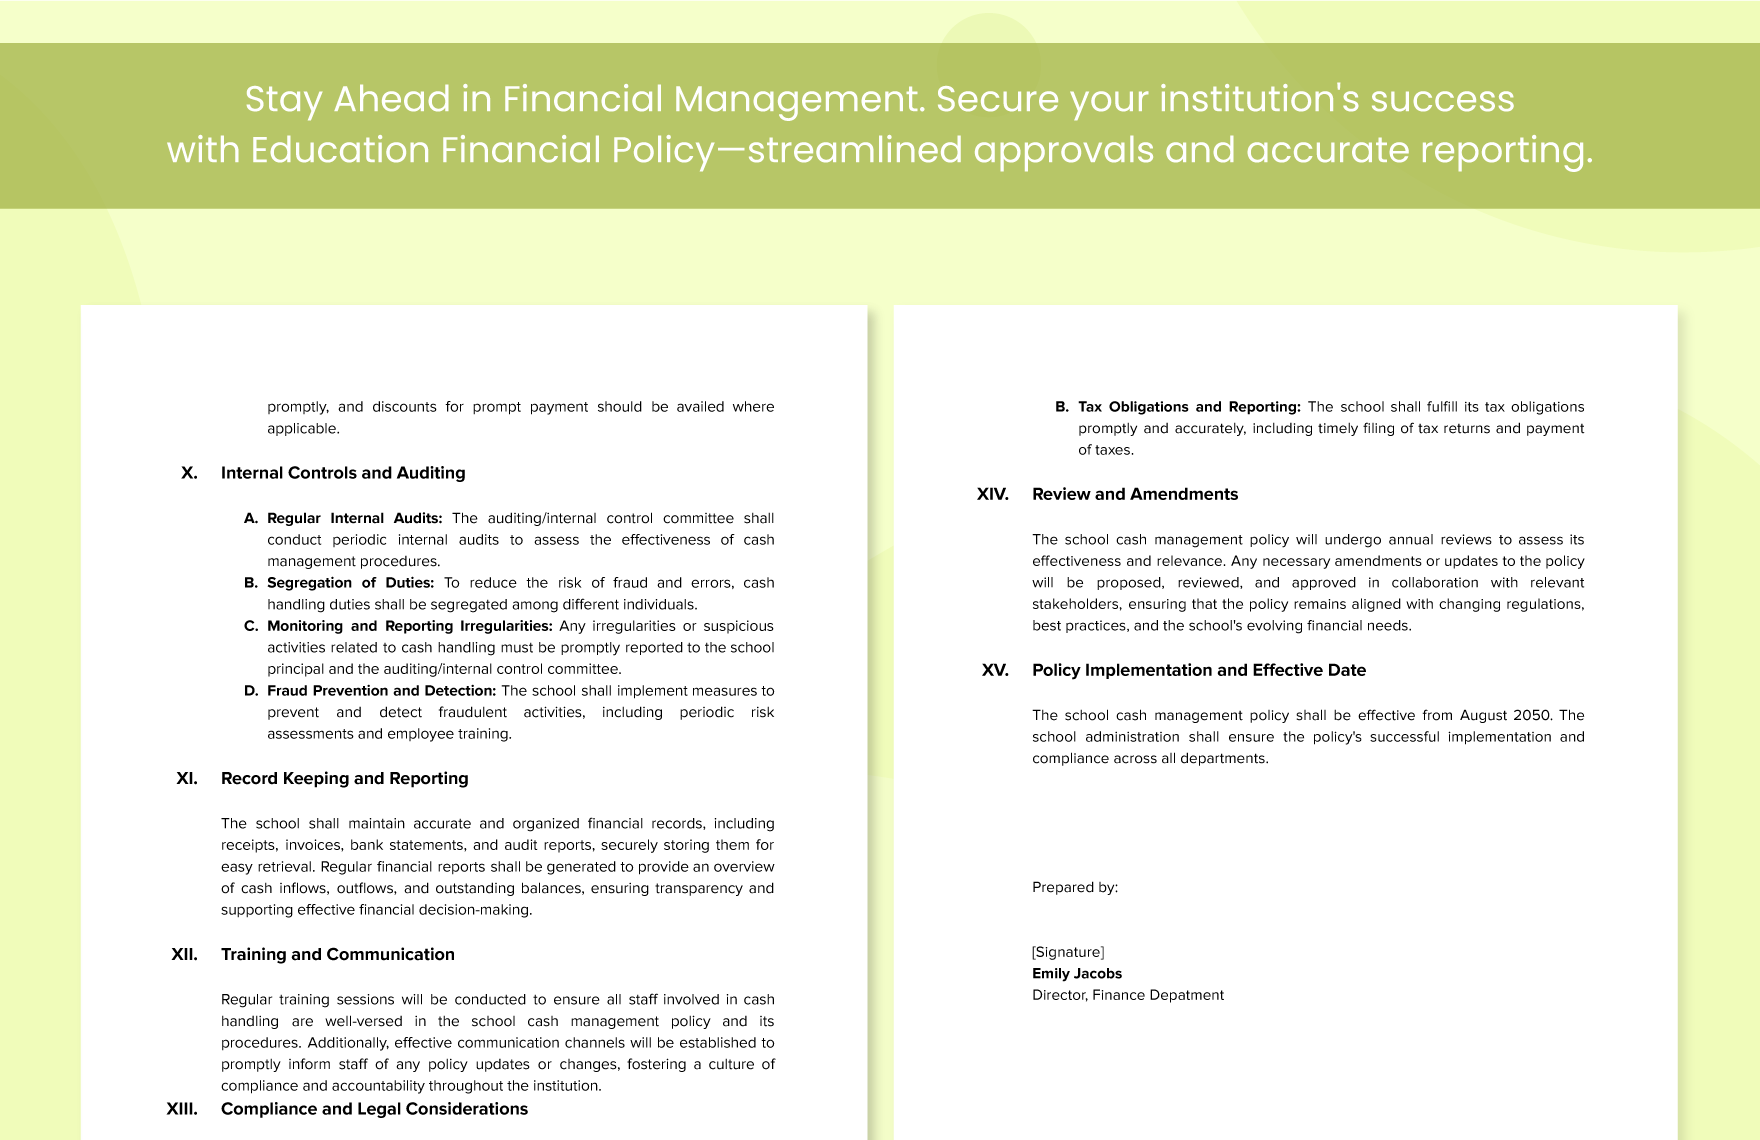 School Cash Management Policy Template